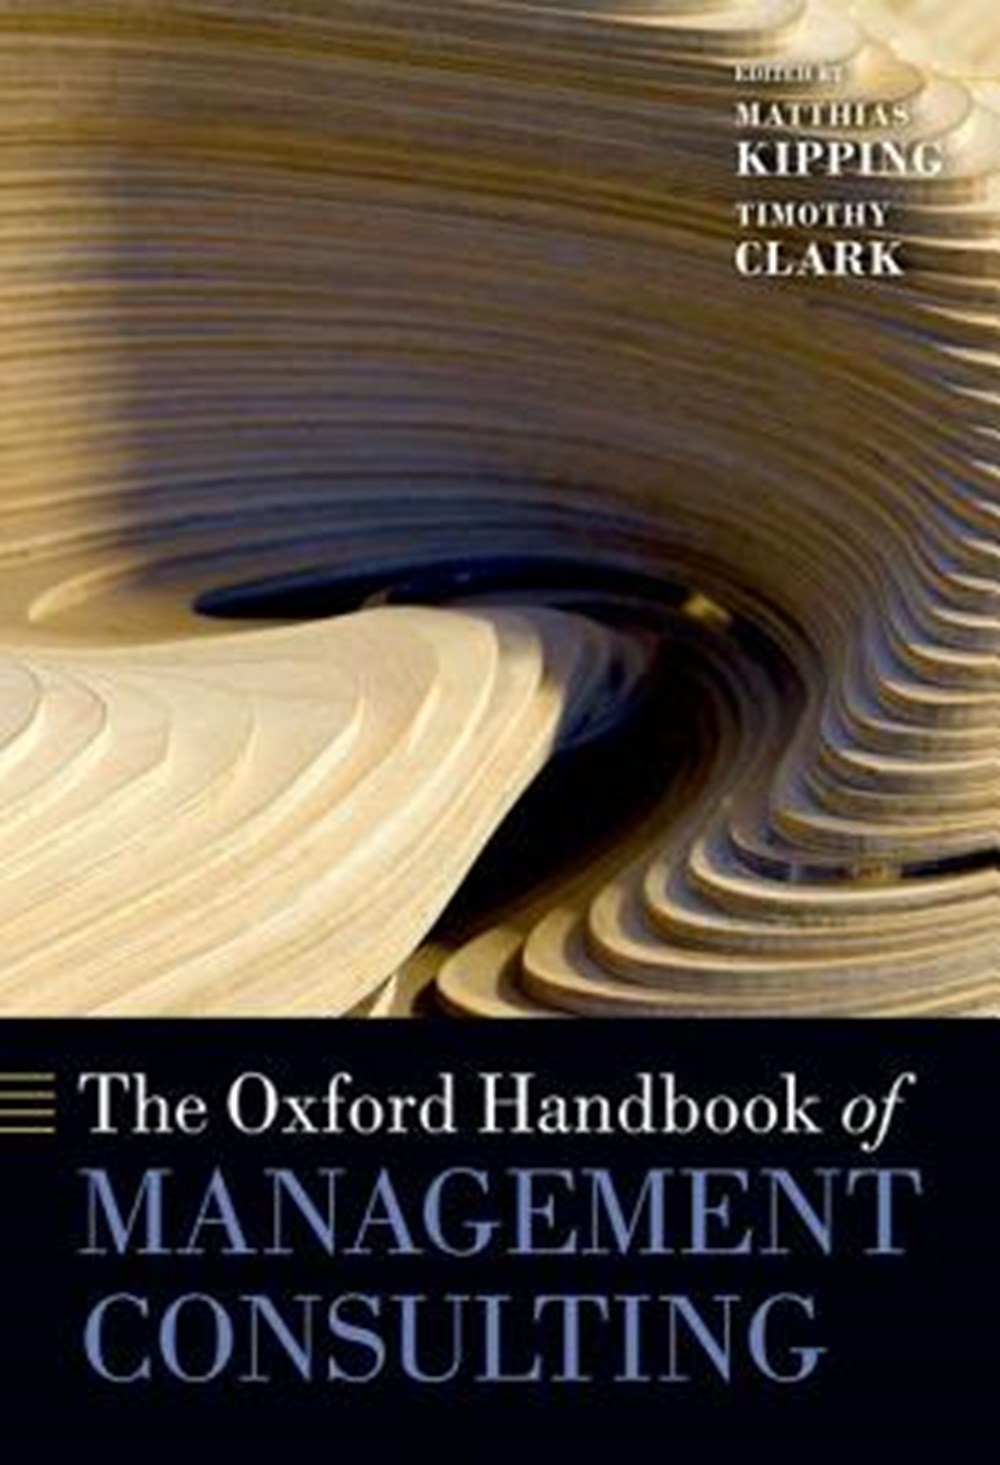 Oxford Handbook of Management Consulting